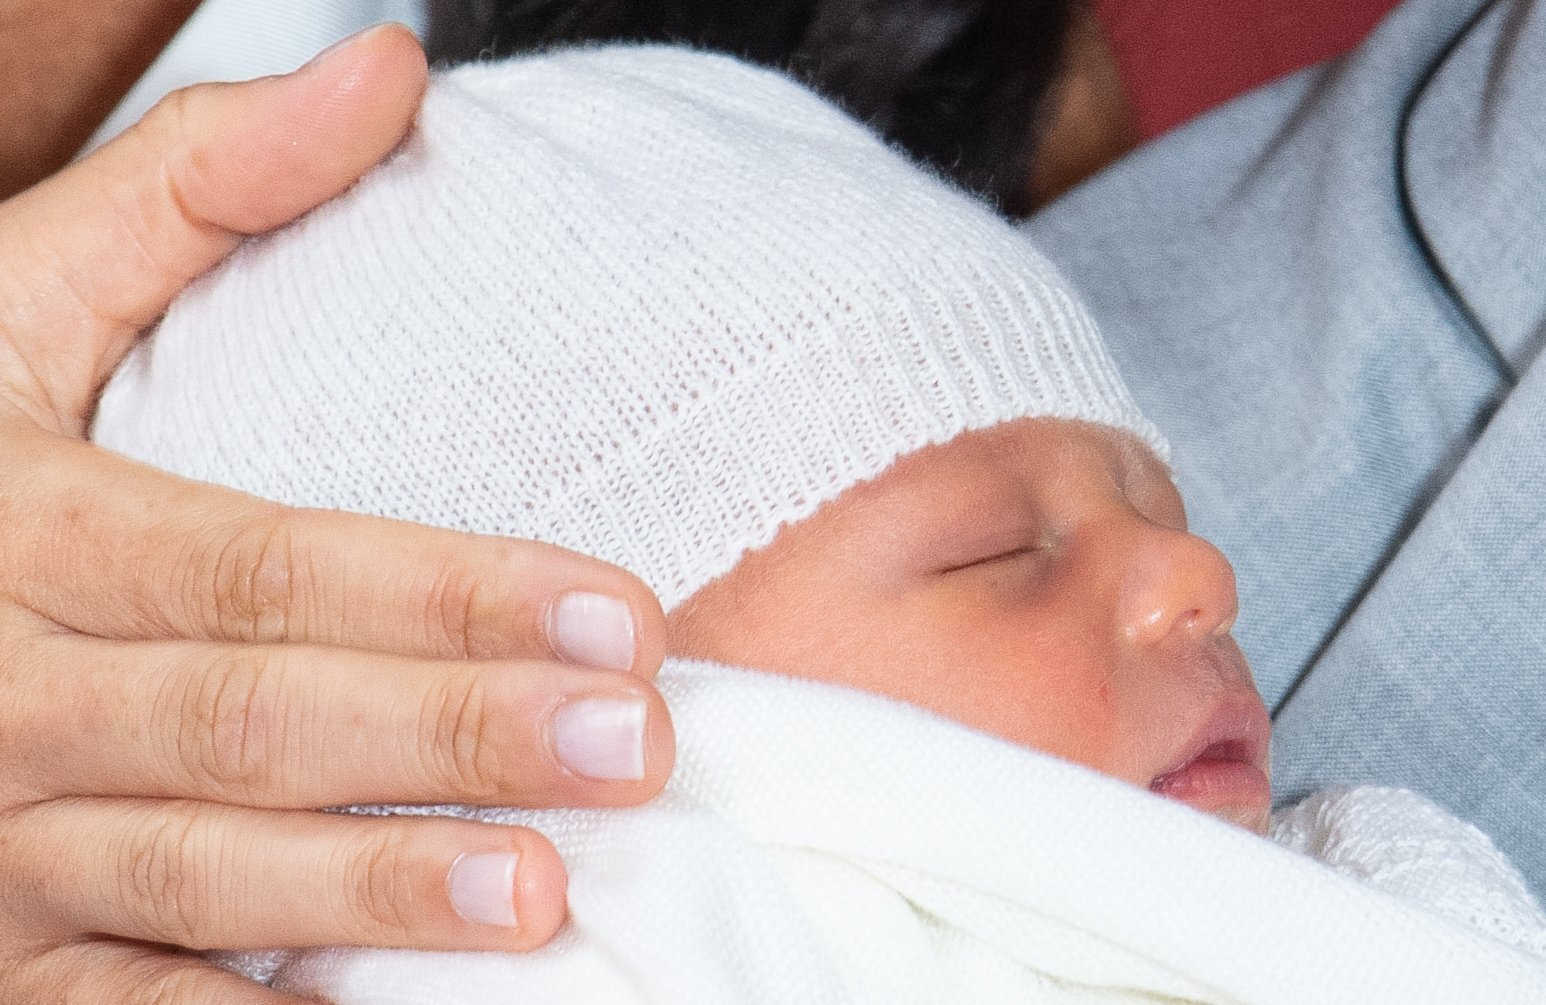 Prince Harry and Duchess Meghan's newborn son Archie Harrison Mountbatten-Windsor during a photocall in St George's Hall at Windsor Castle on May 8, 2019 in Windsor, England | Photo: Getty Images